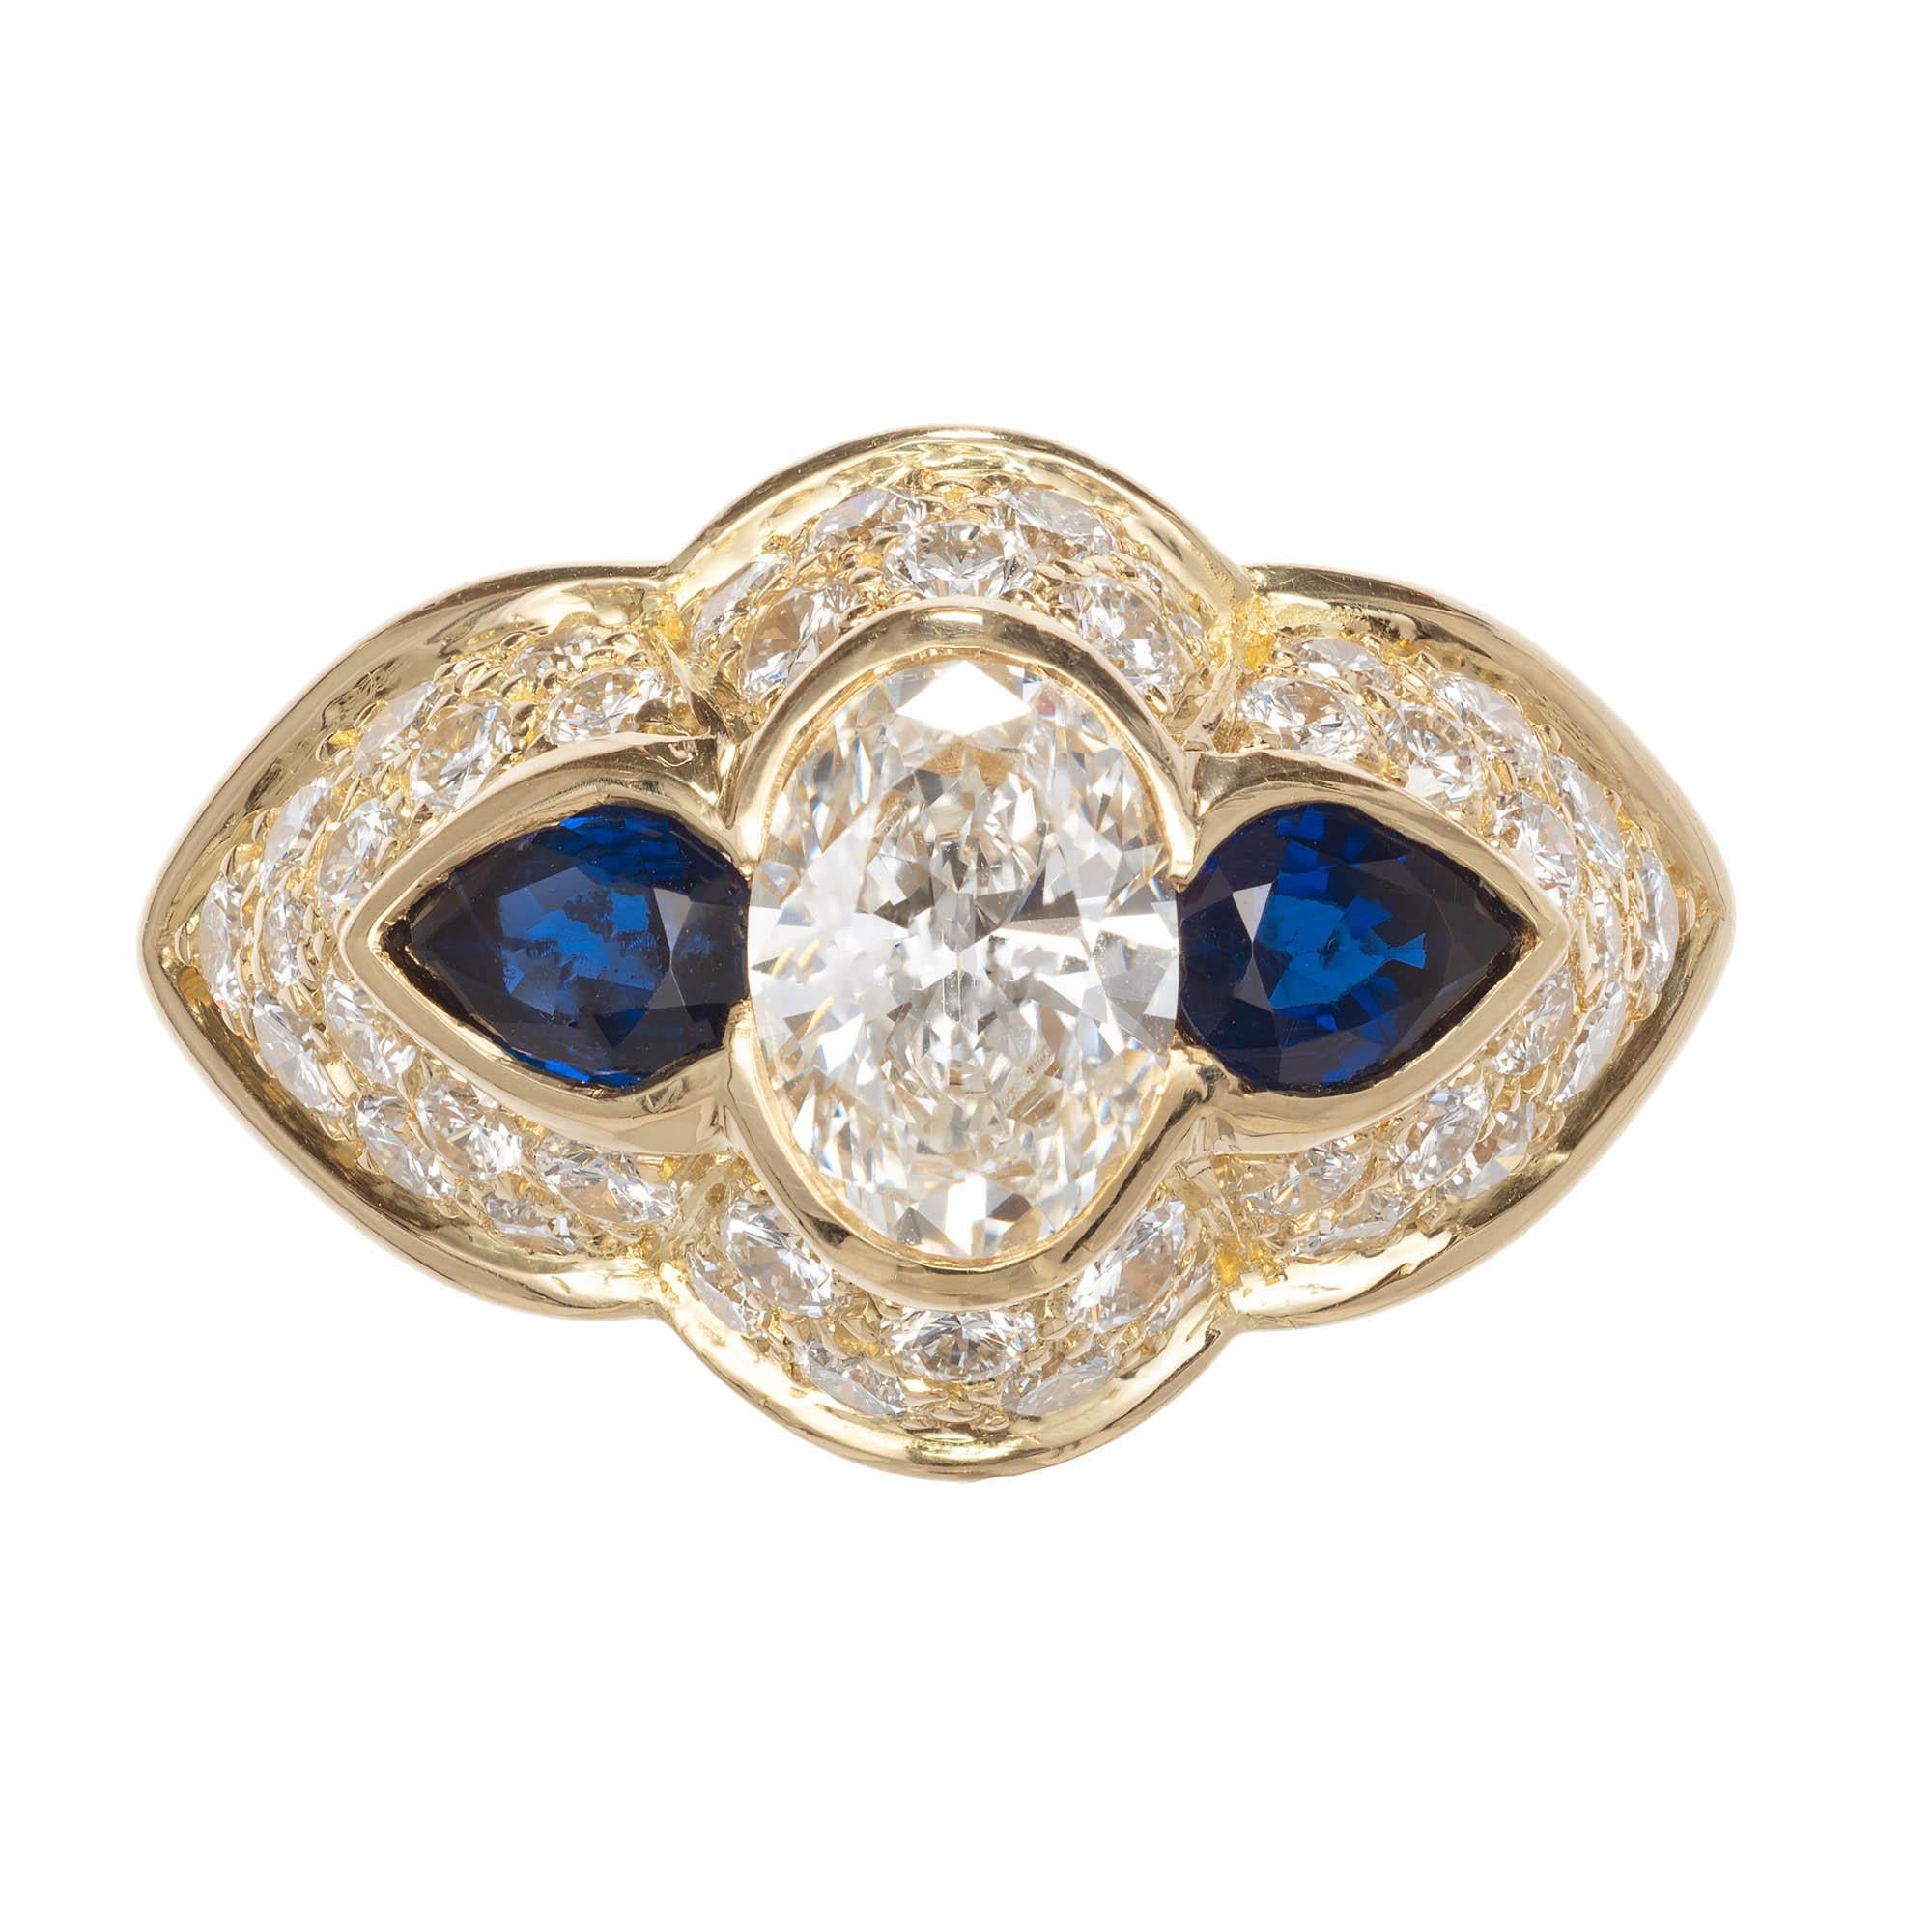 1.13 Carat Diamond Sapphire Gold Scalloped Engagement Ring For Sale